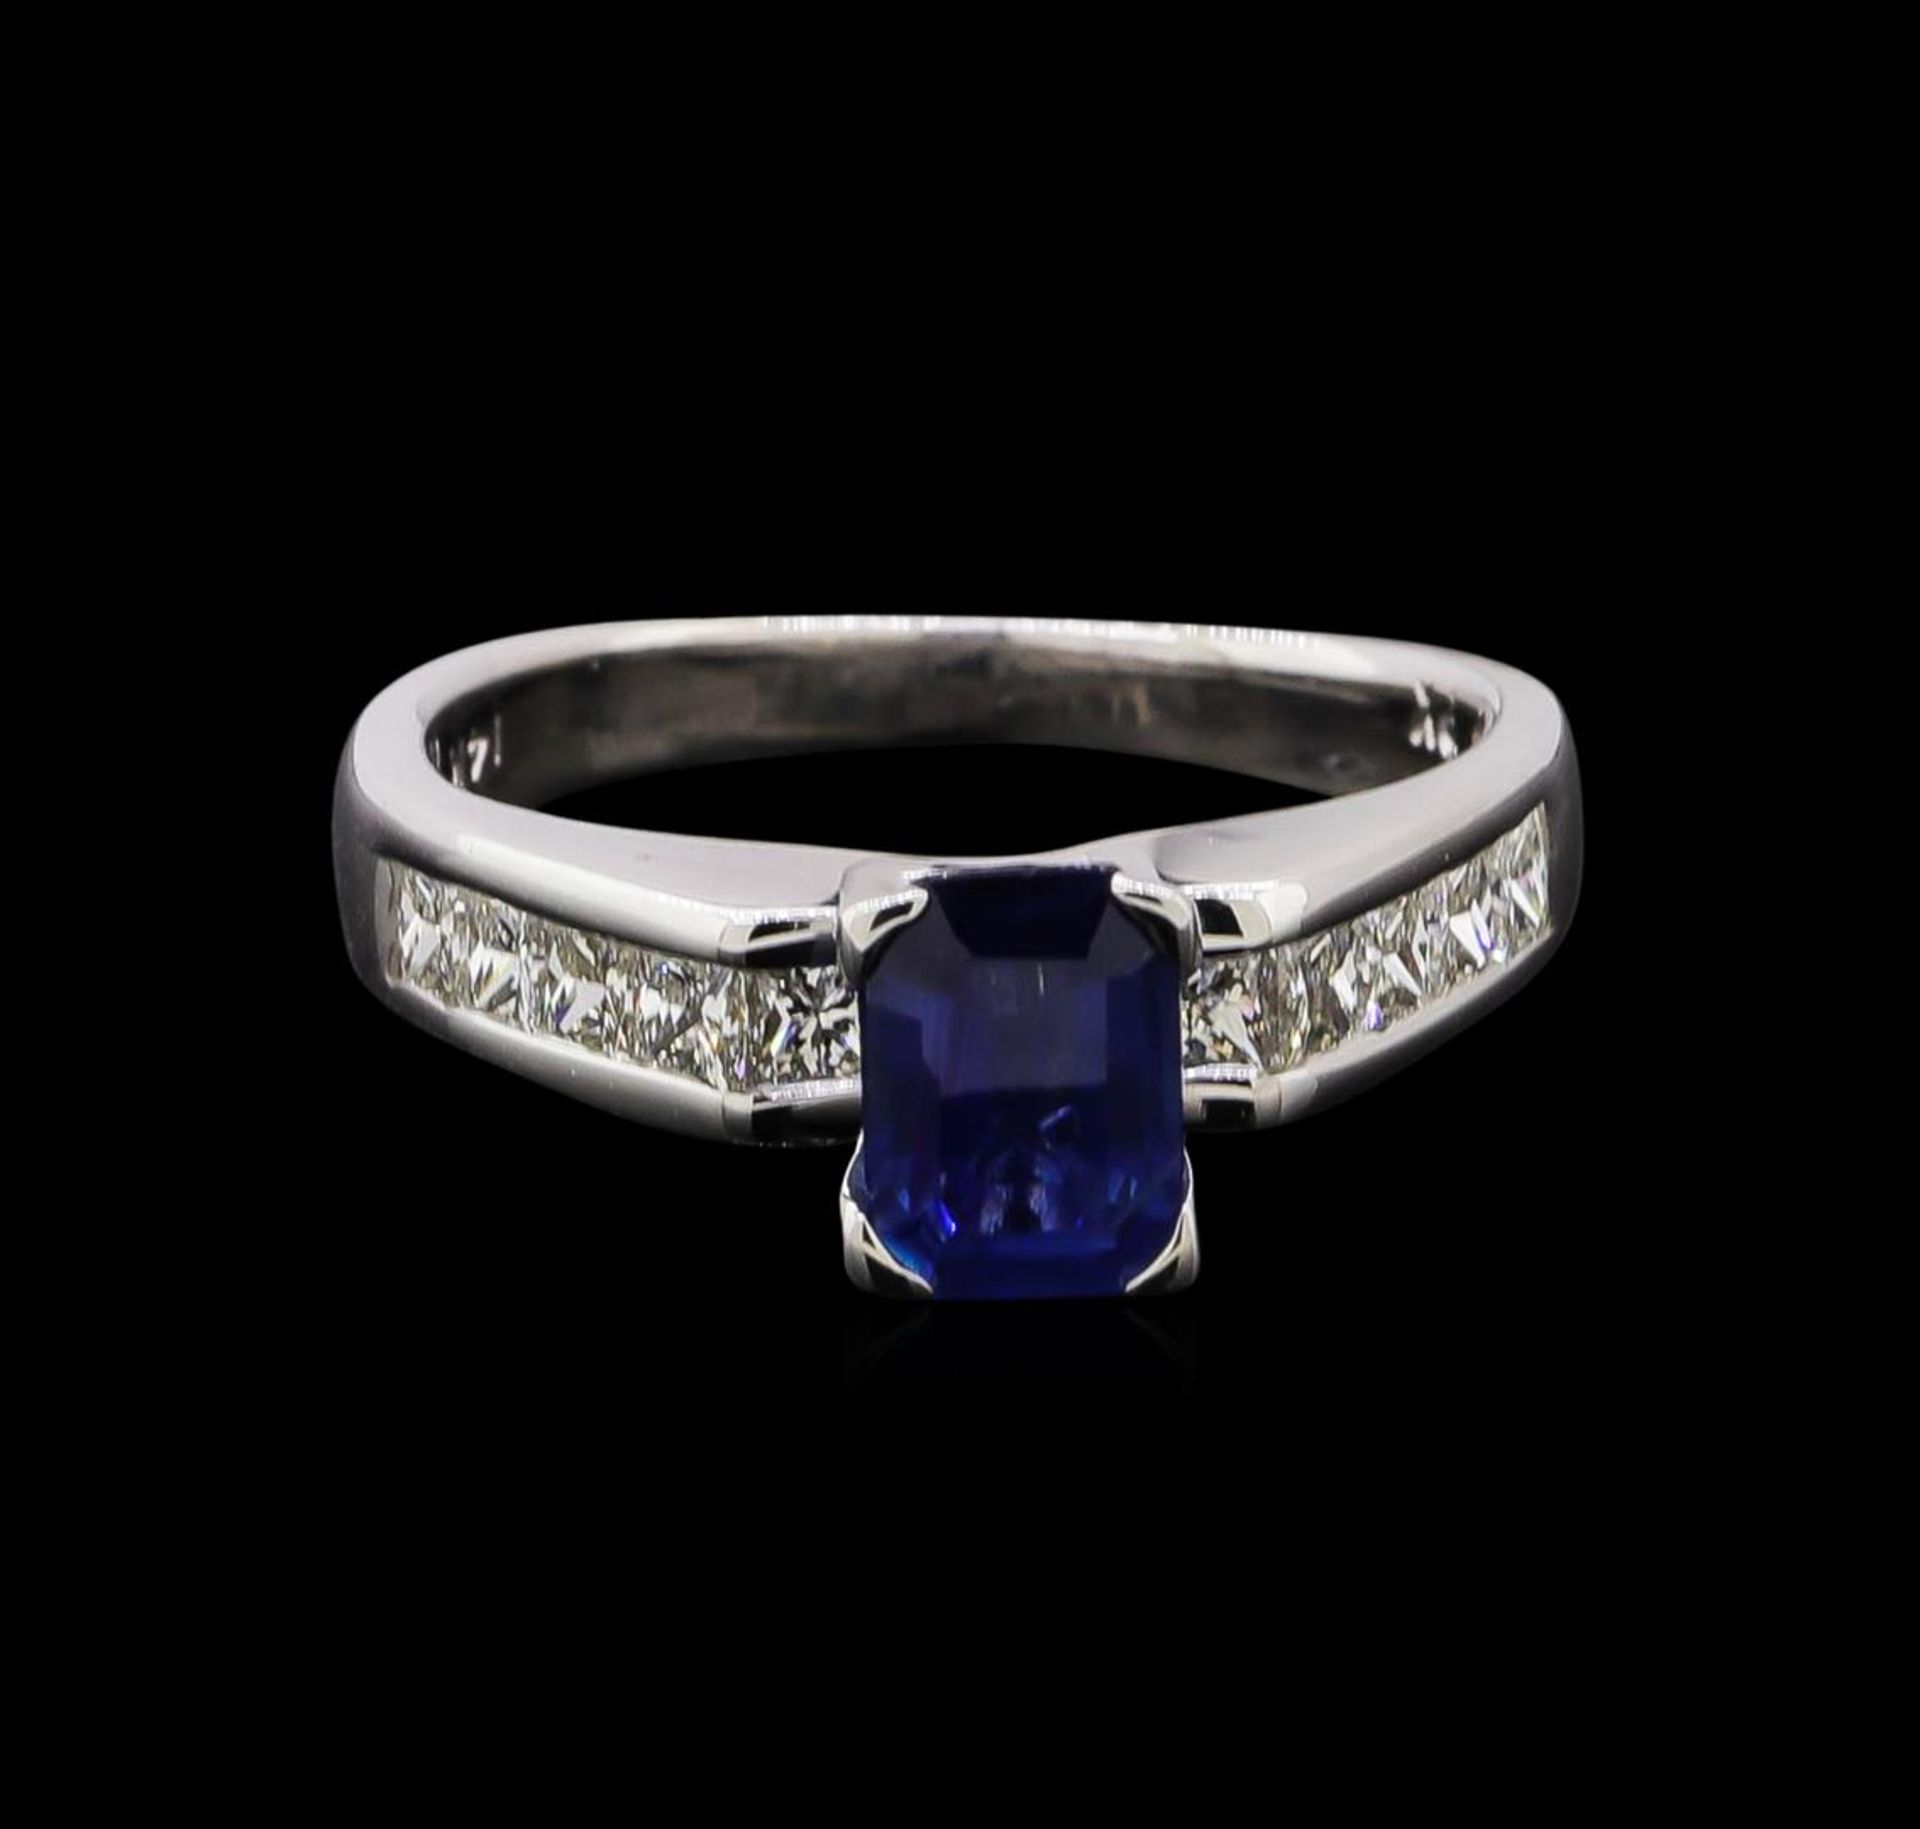 0.95 ctw Sapphire and Diamond Ring - 14KT White Gold - Image 2 of 4